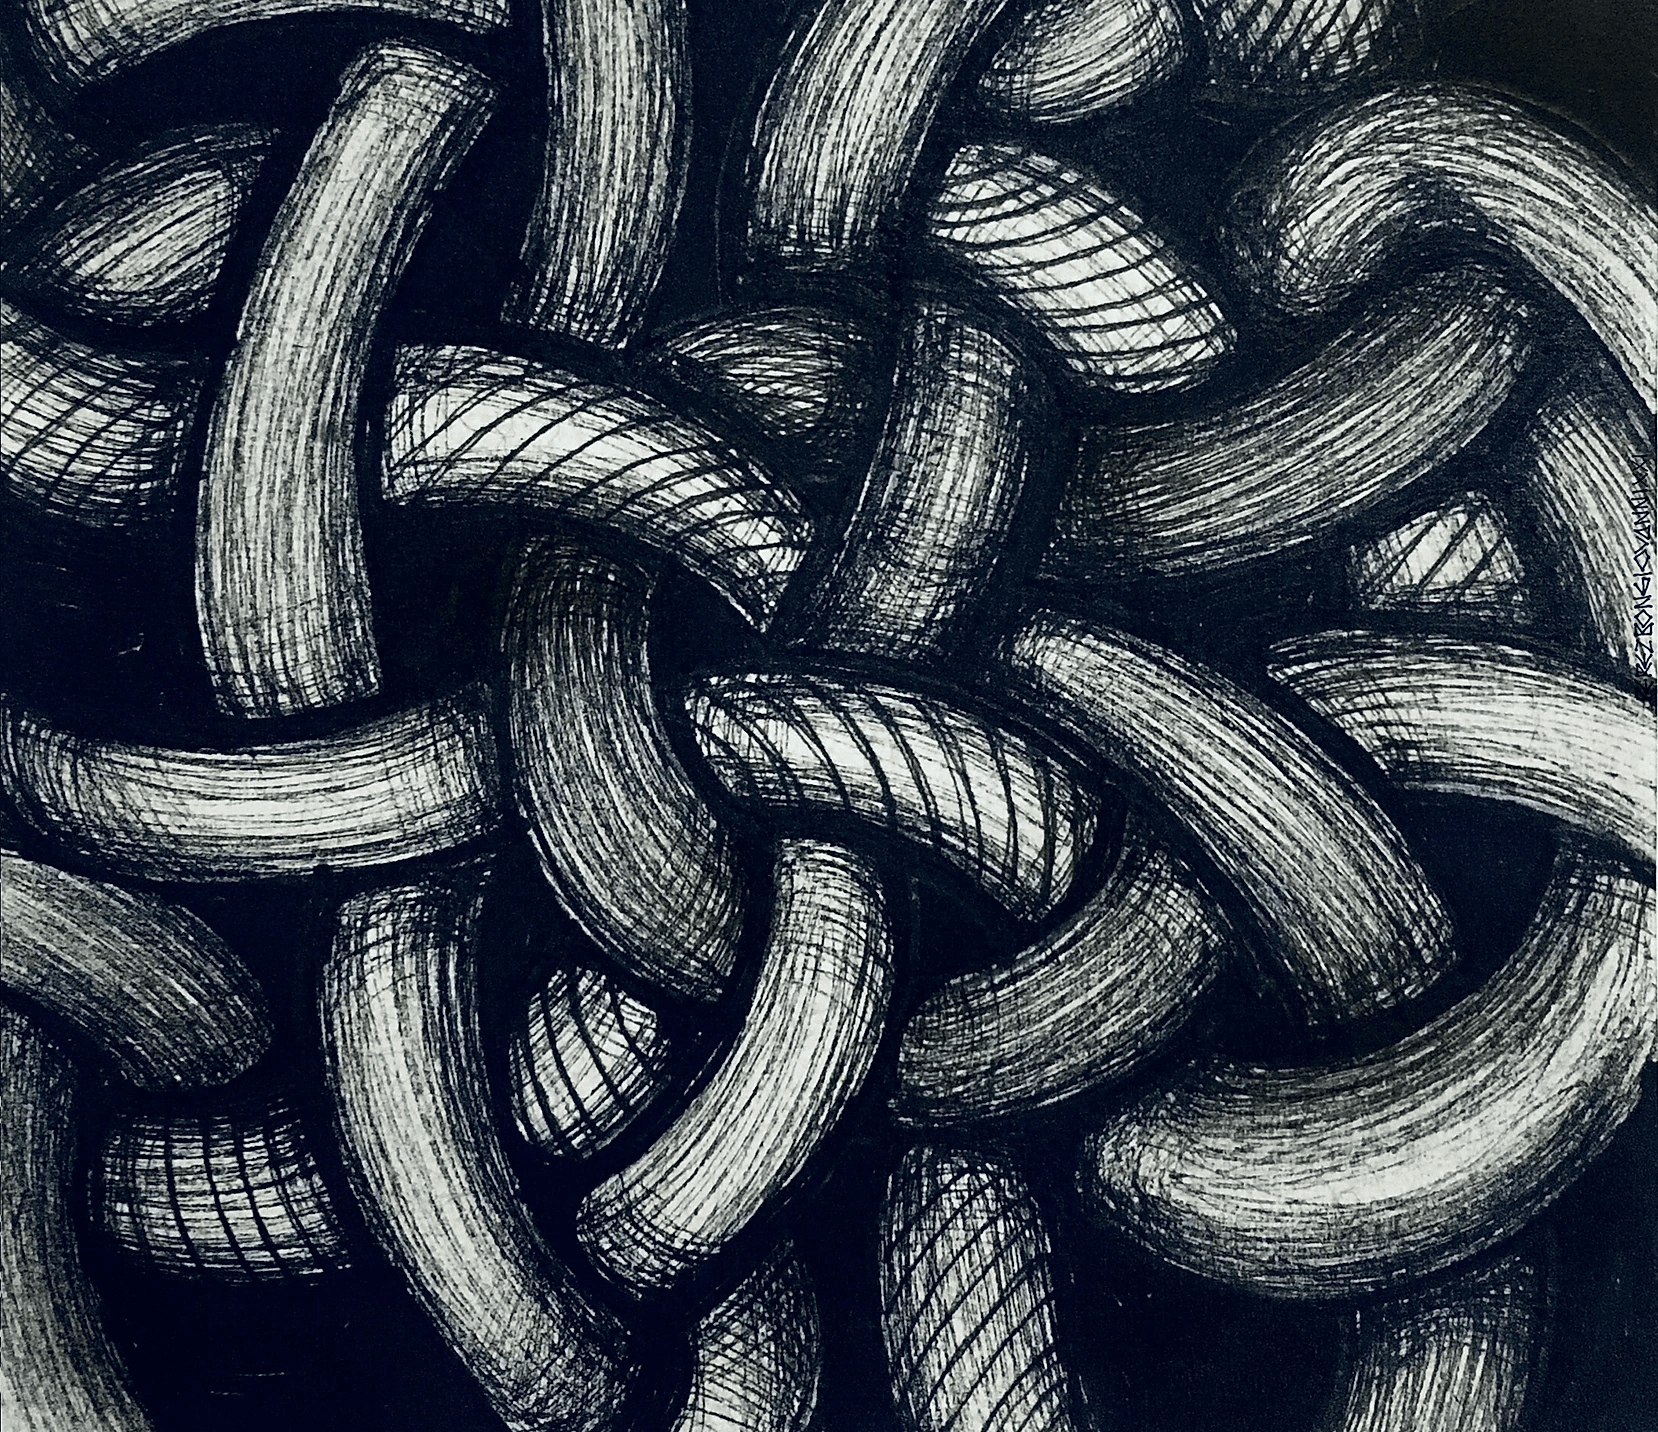 04. Knot